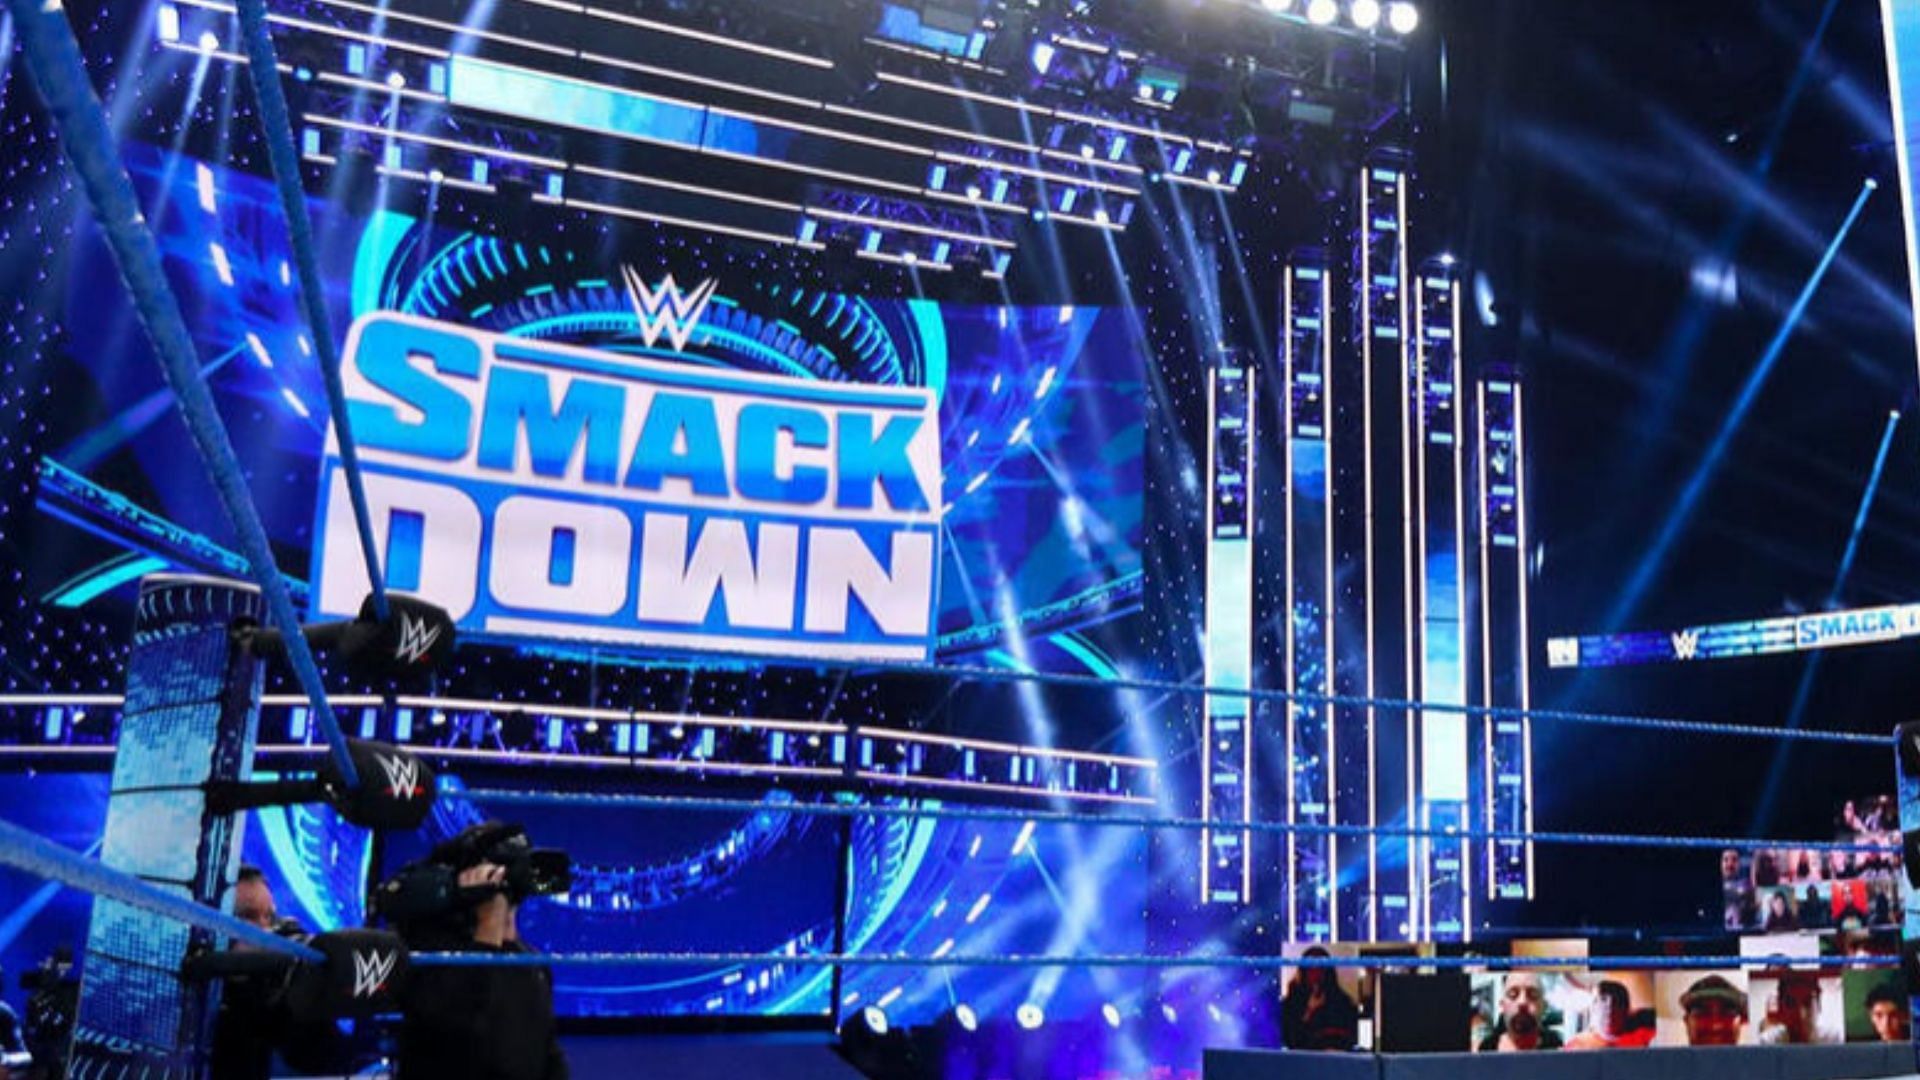 A brutal match is about to happen tonight on WWE SmackDown.